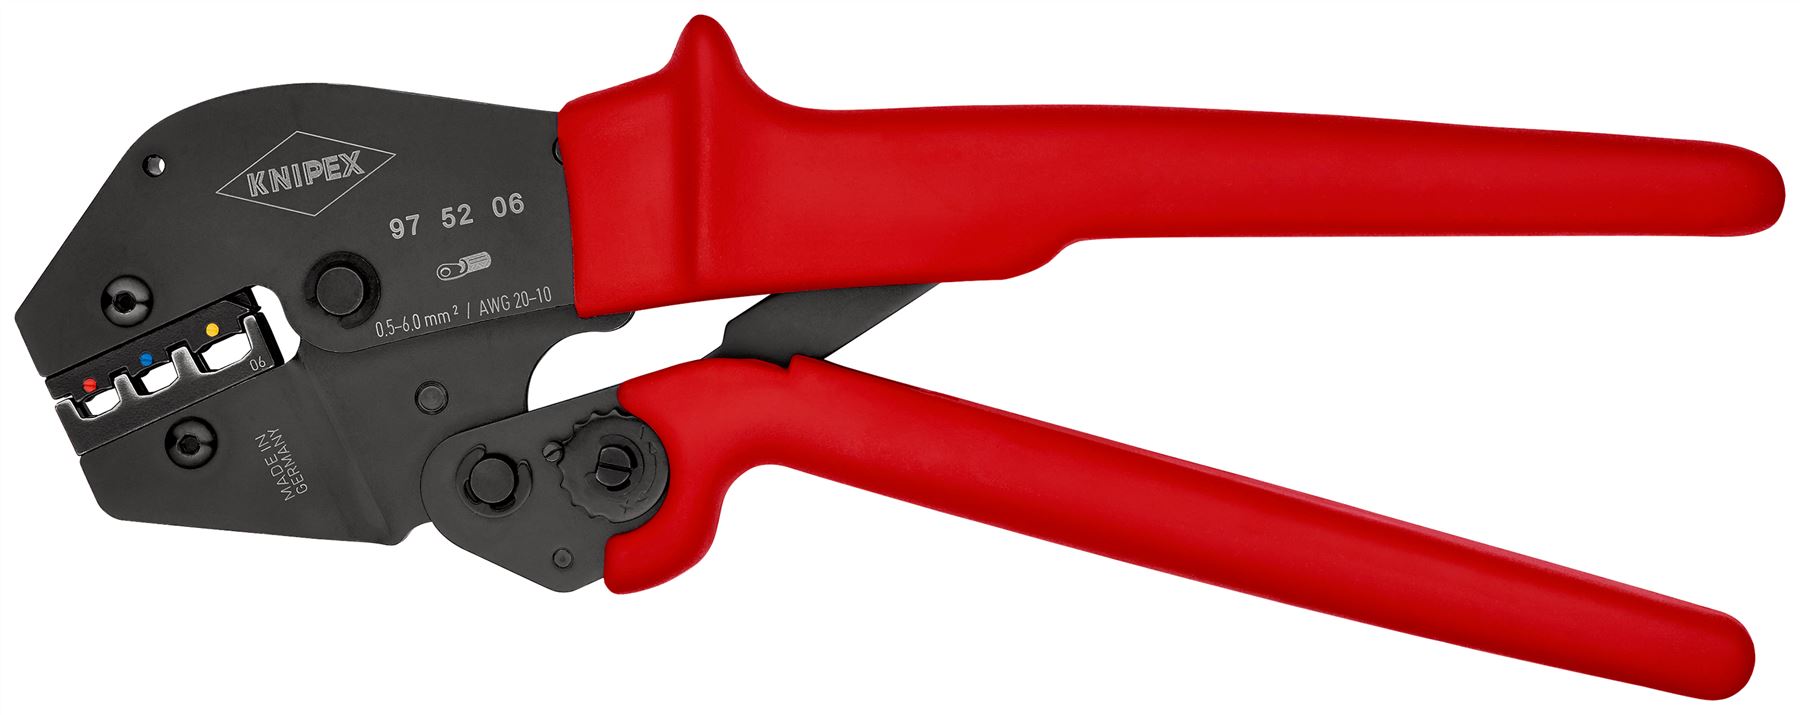 KNIPEX Crimping Pliers Two Hand Operation for Solder Free Electrical Connections 250mm 97 52 06